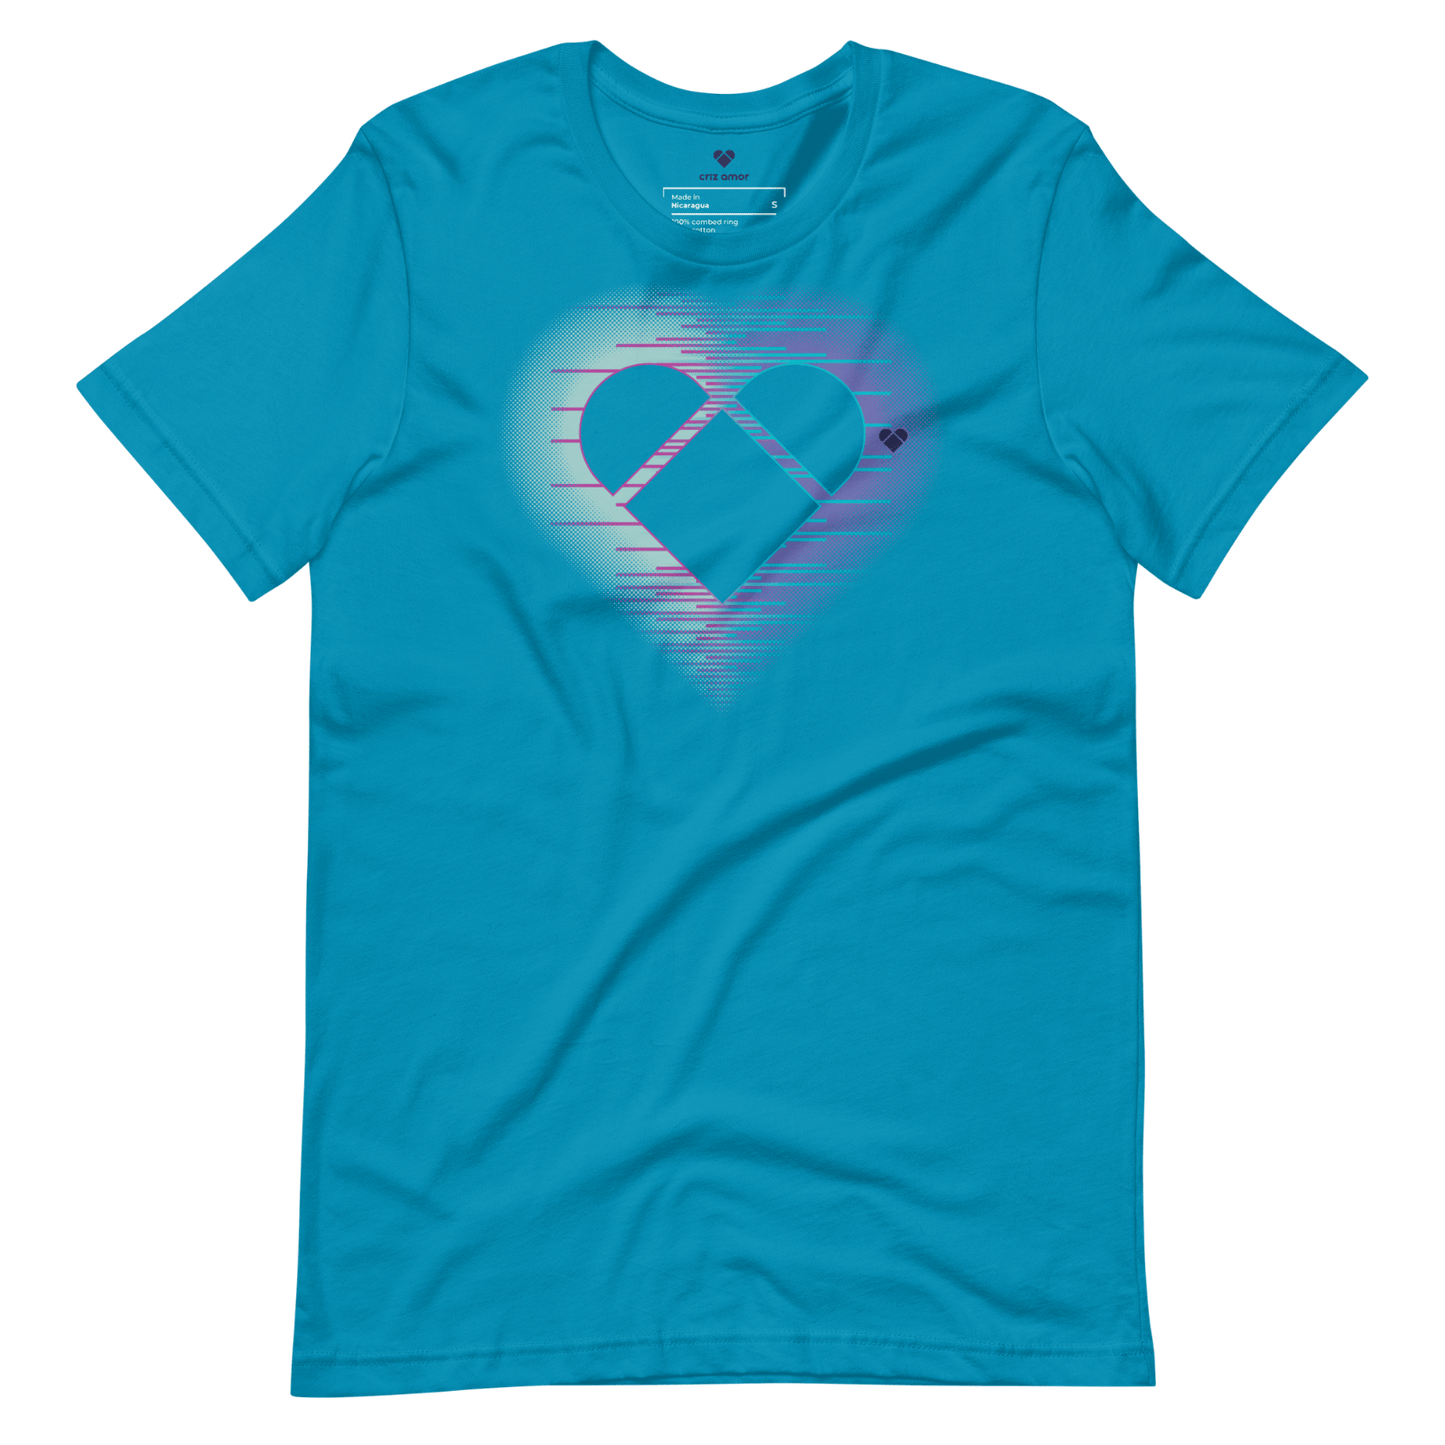 Aqua Tee with heart logo and dual aura from Amor Dual collection